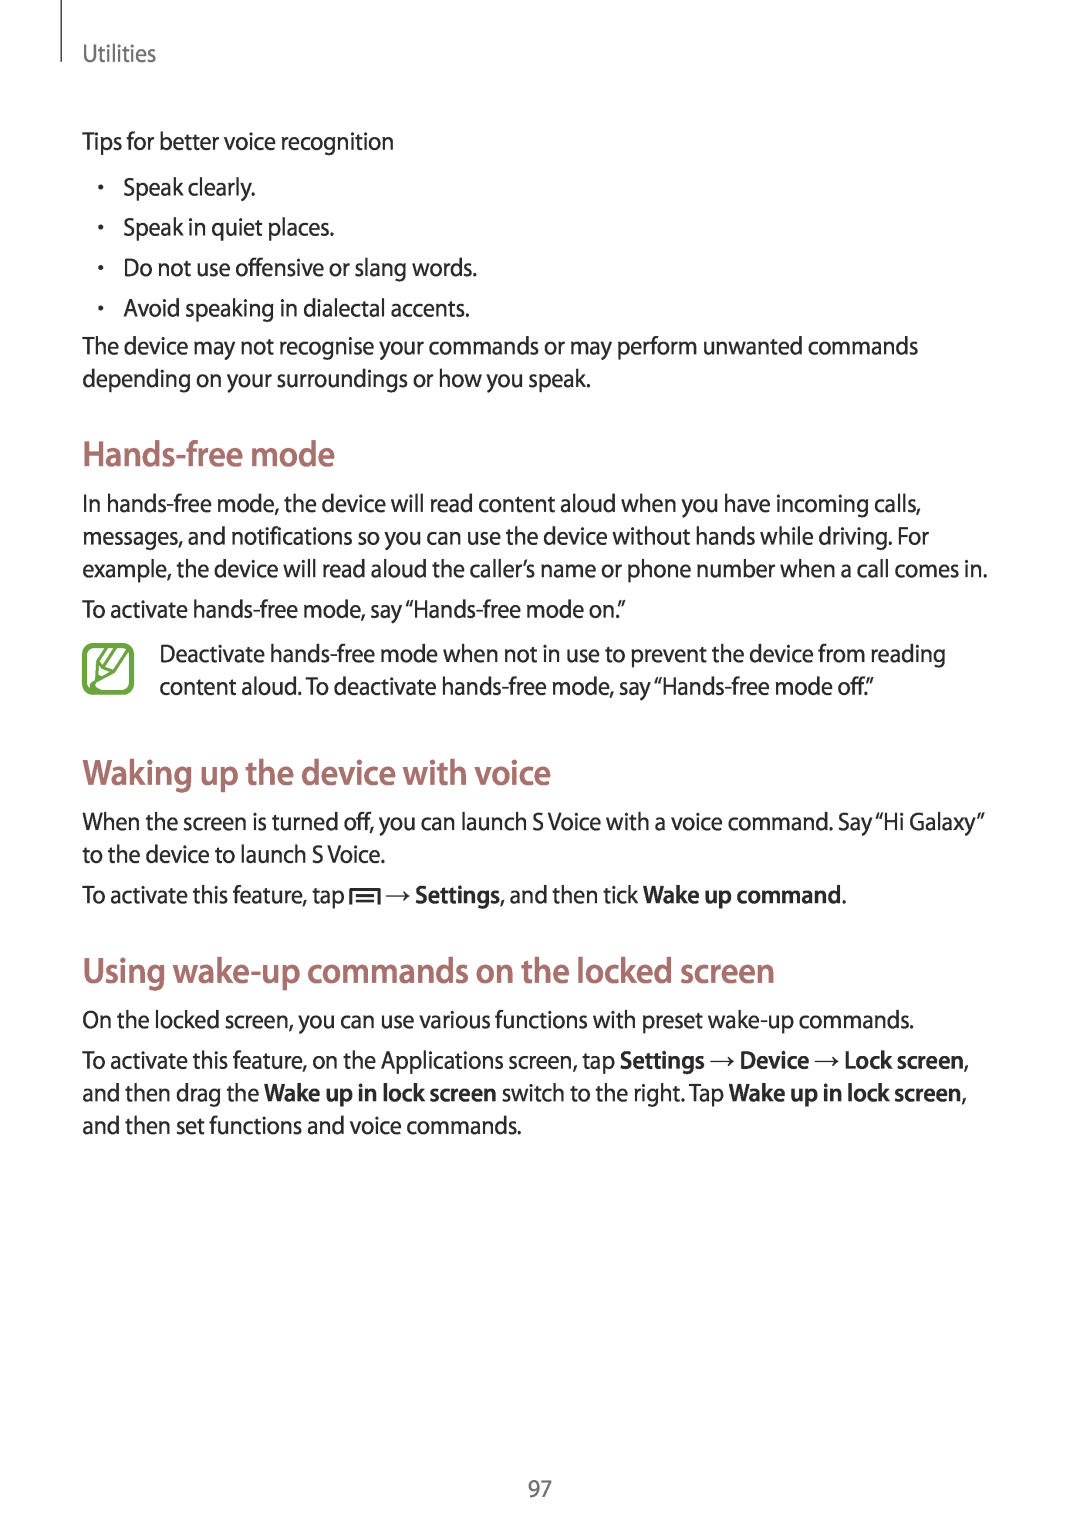 Samsung SM-G7102ZWATMC manual Hands-free mode, Waking up the device with voice, Using wake-up commands on the locked screen 